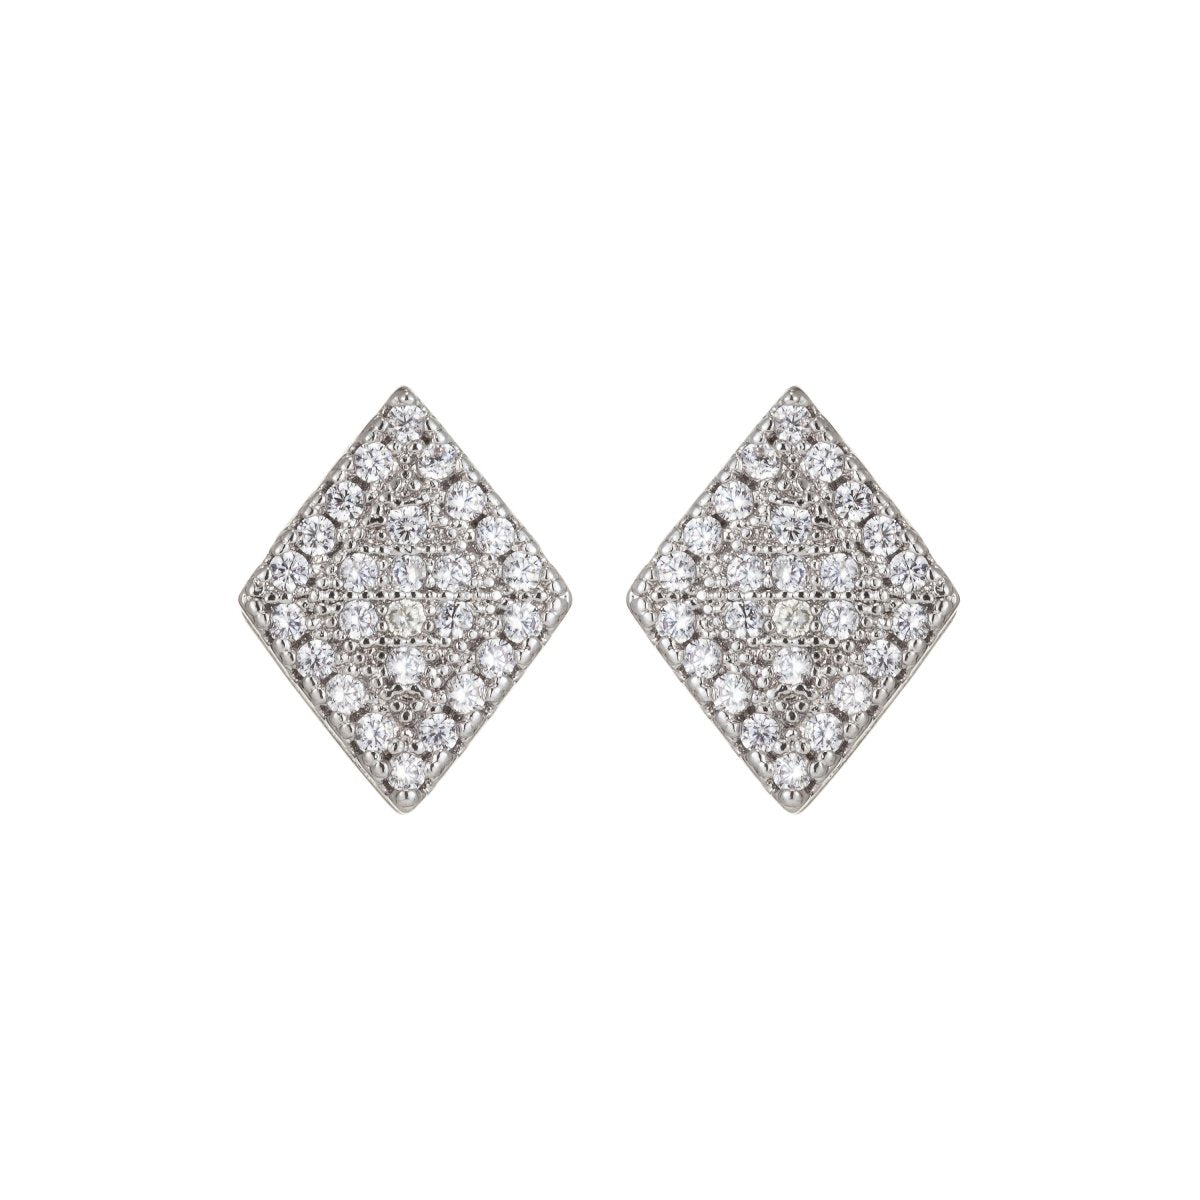 Dainty Silver Geometric Stud Earrings in Clear Cubic Zirconia Micro Pave earring Supply Q-074 Q-076 Q-078 Q-079 - DLUXCA